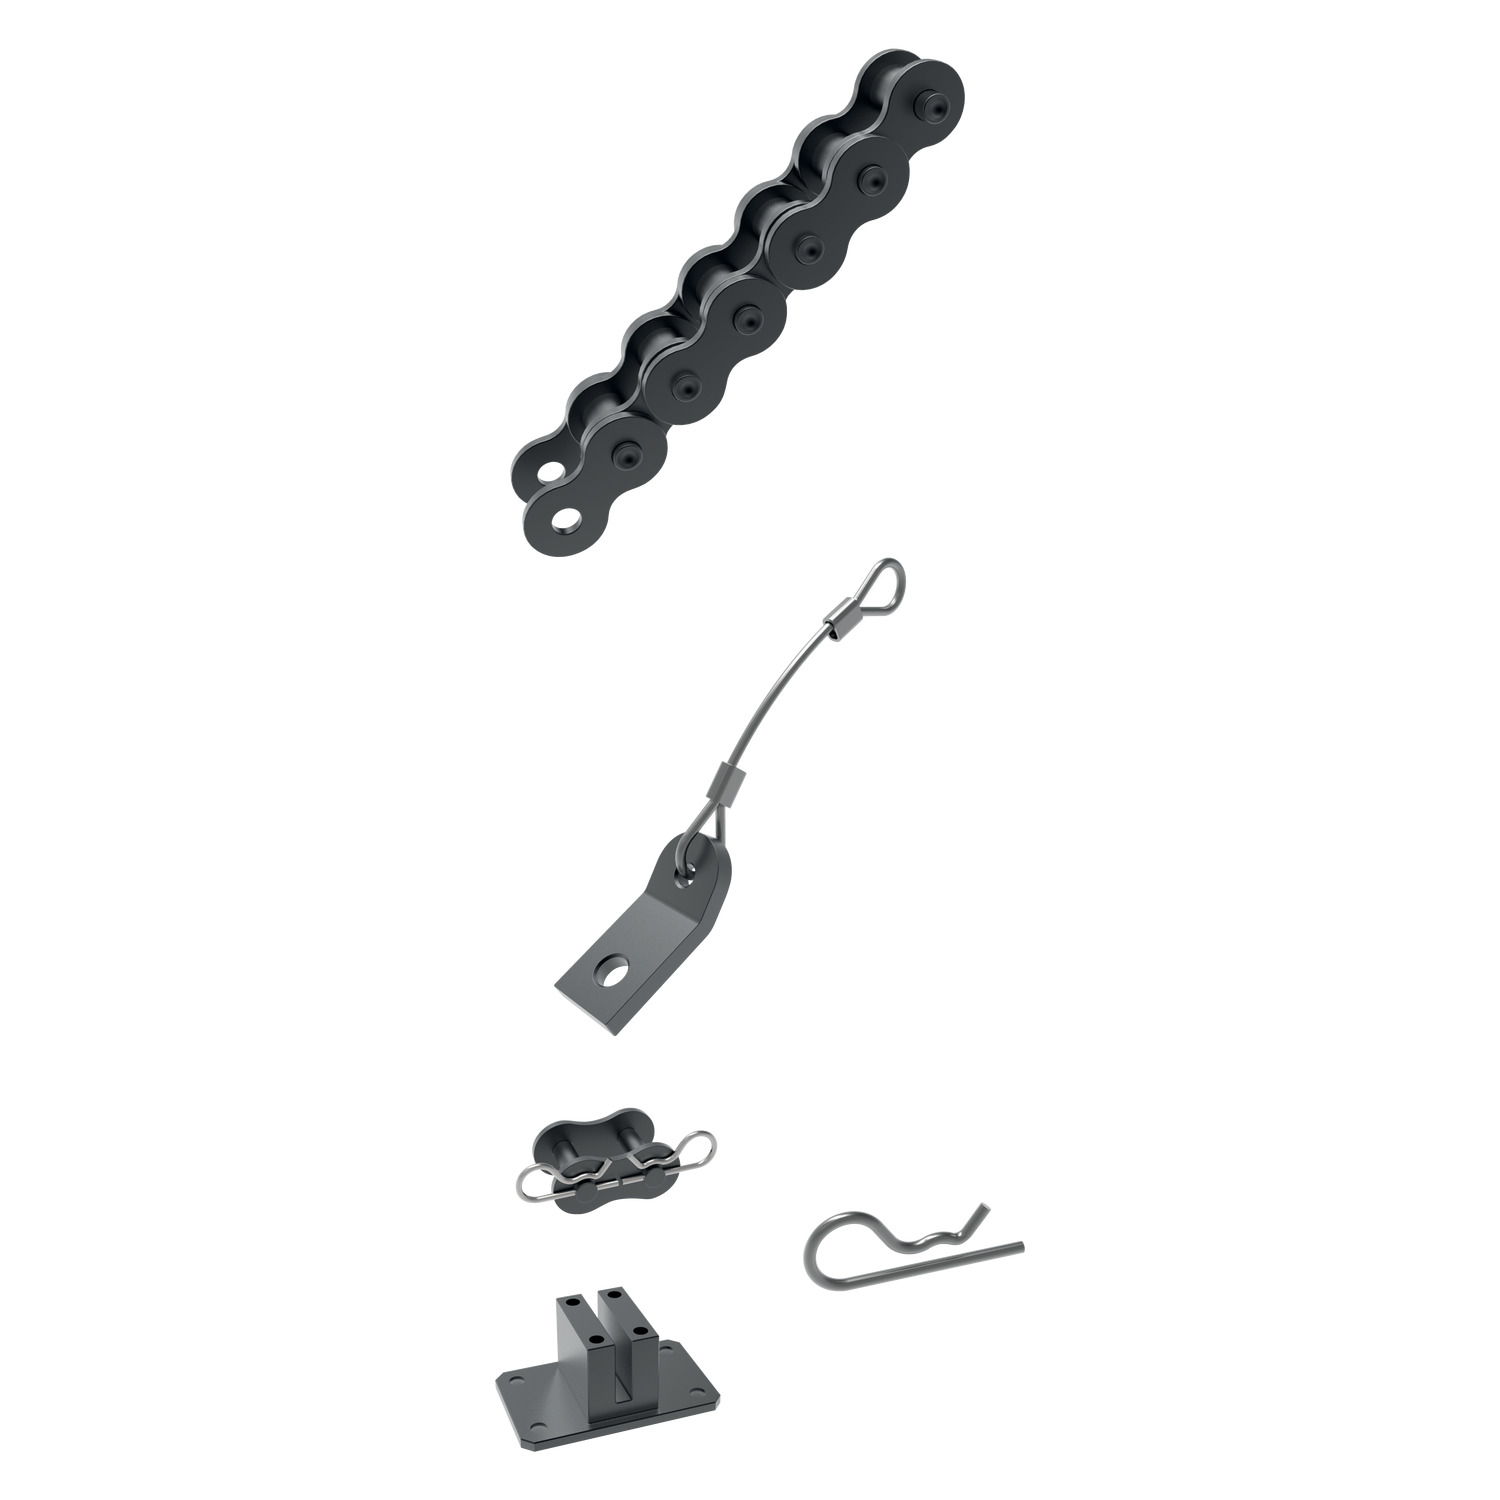 12705.W0016 Clamping Clamp Accessories Lanyard - M16 - - - -